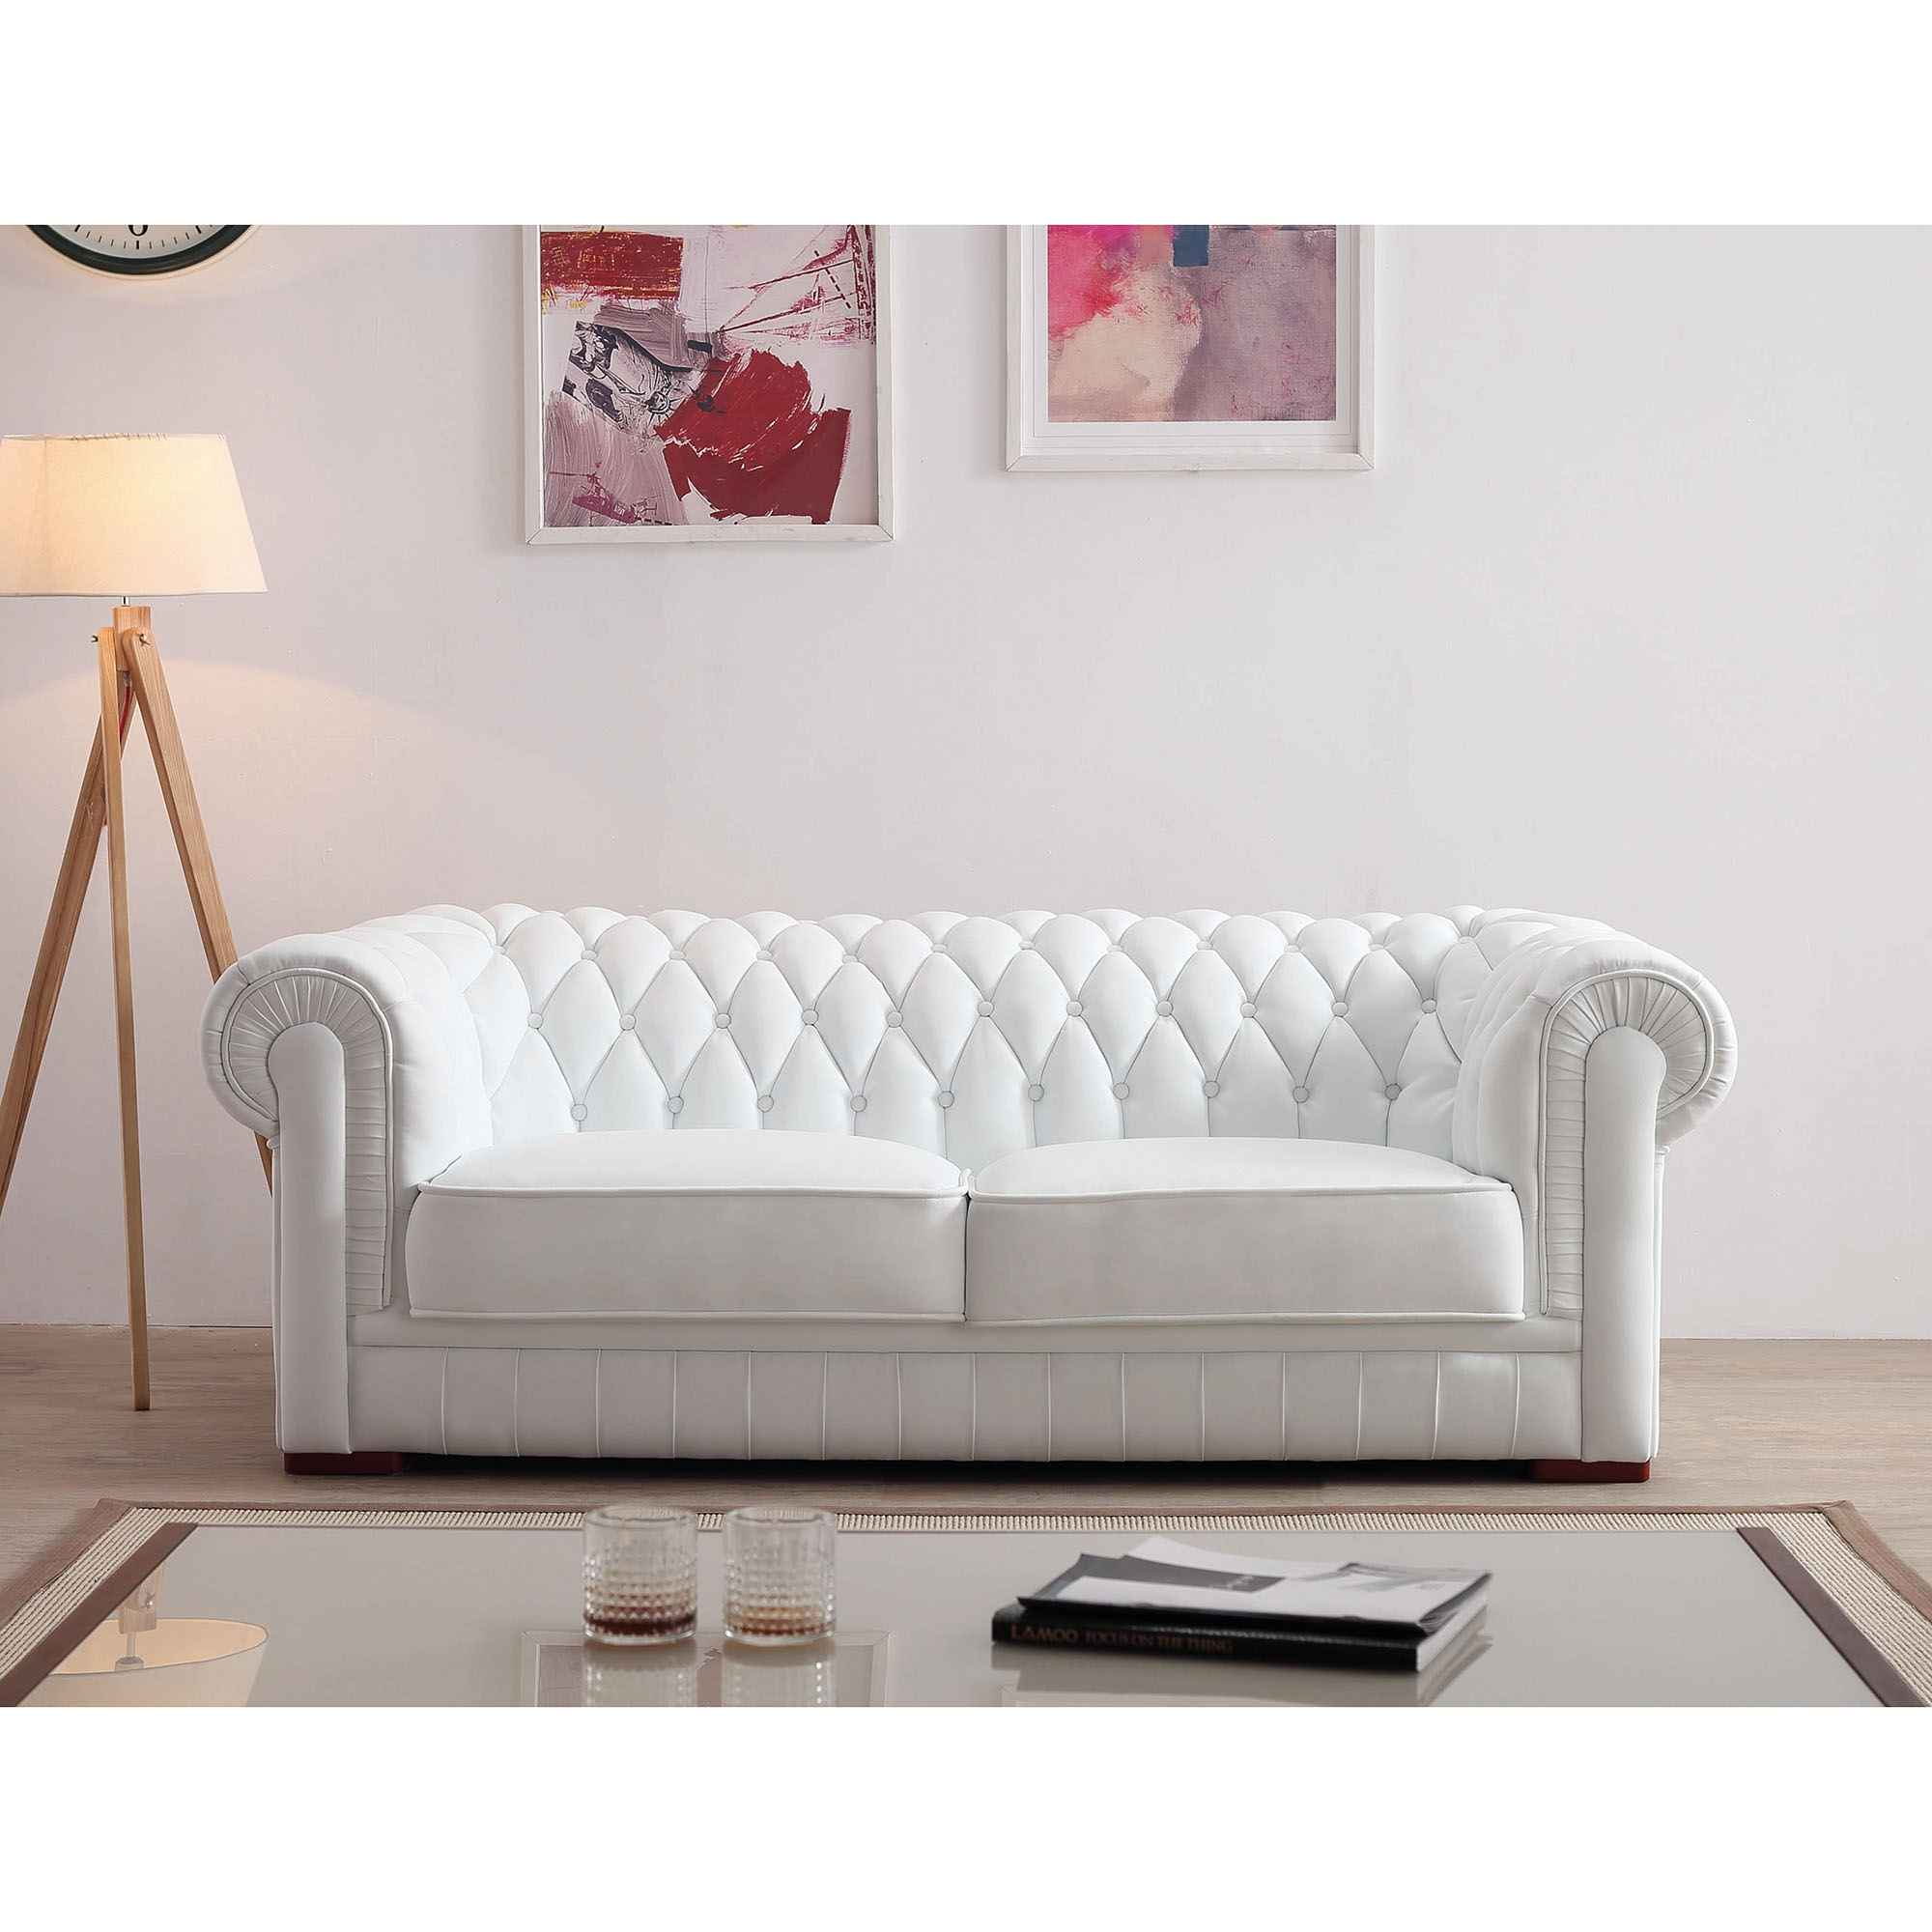 3_Canape Capitonne 3 Places Blanc Chesterfield Can 2220 ... dedans Canapé 3 Places Chesterfield Cuir